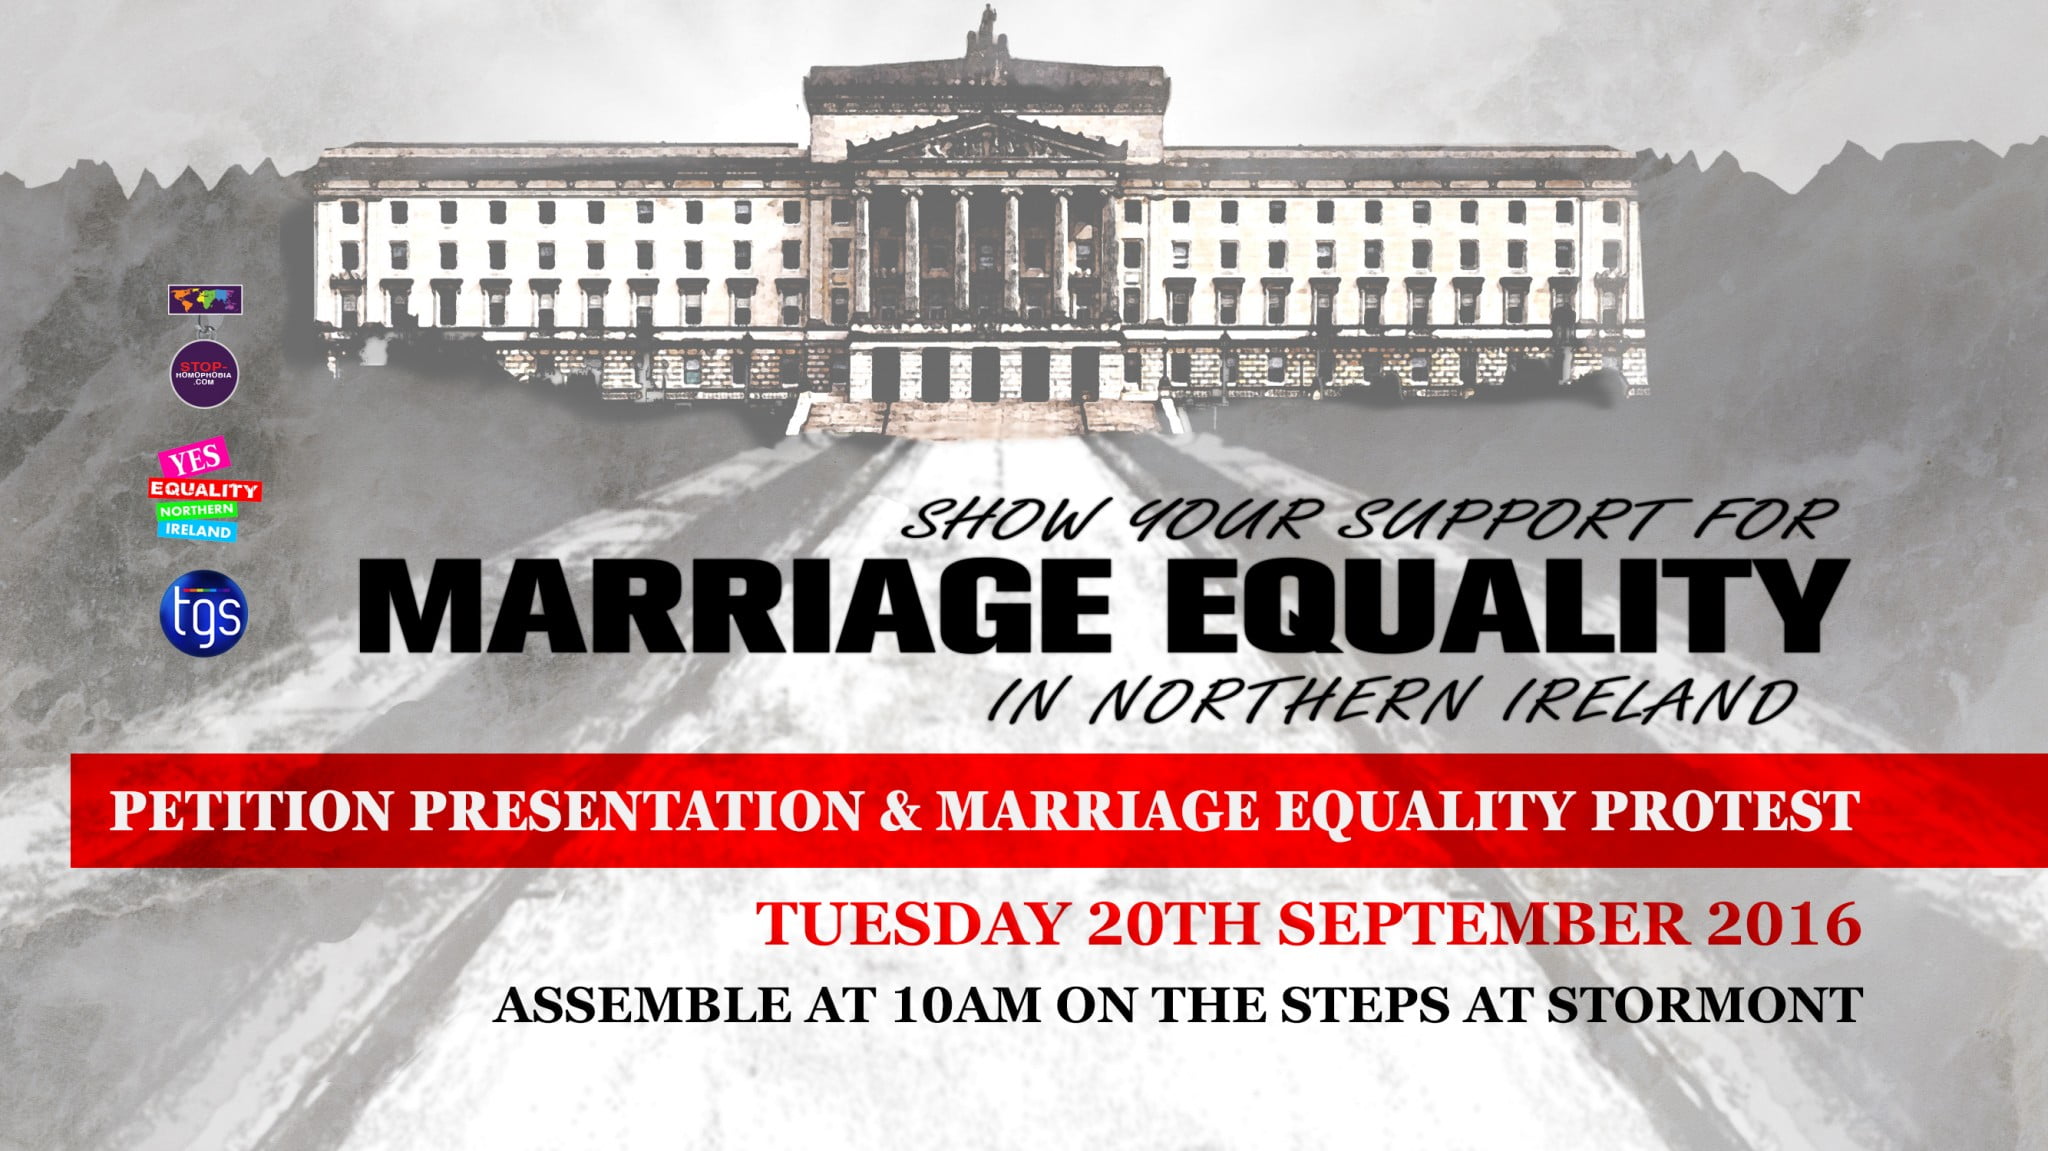 Marriage Equality petition to be presented at Stormont